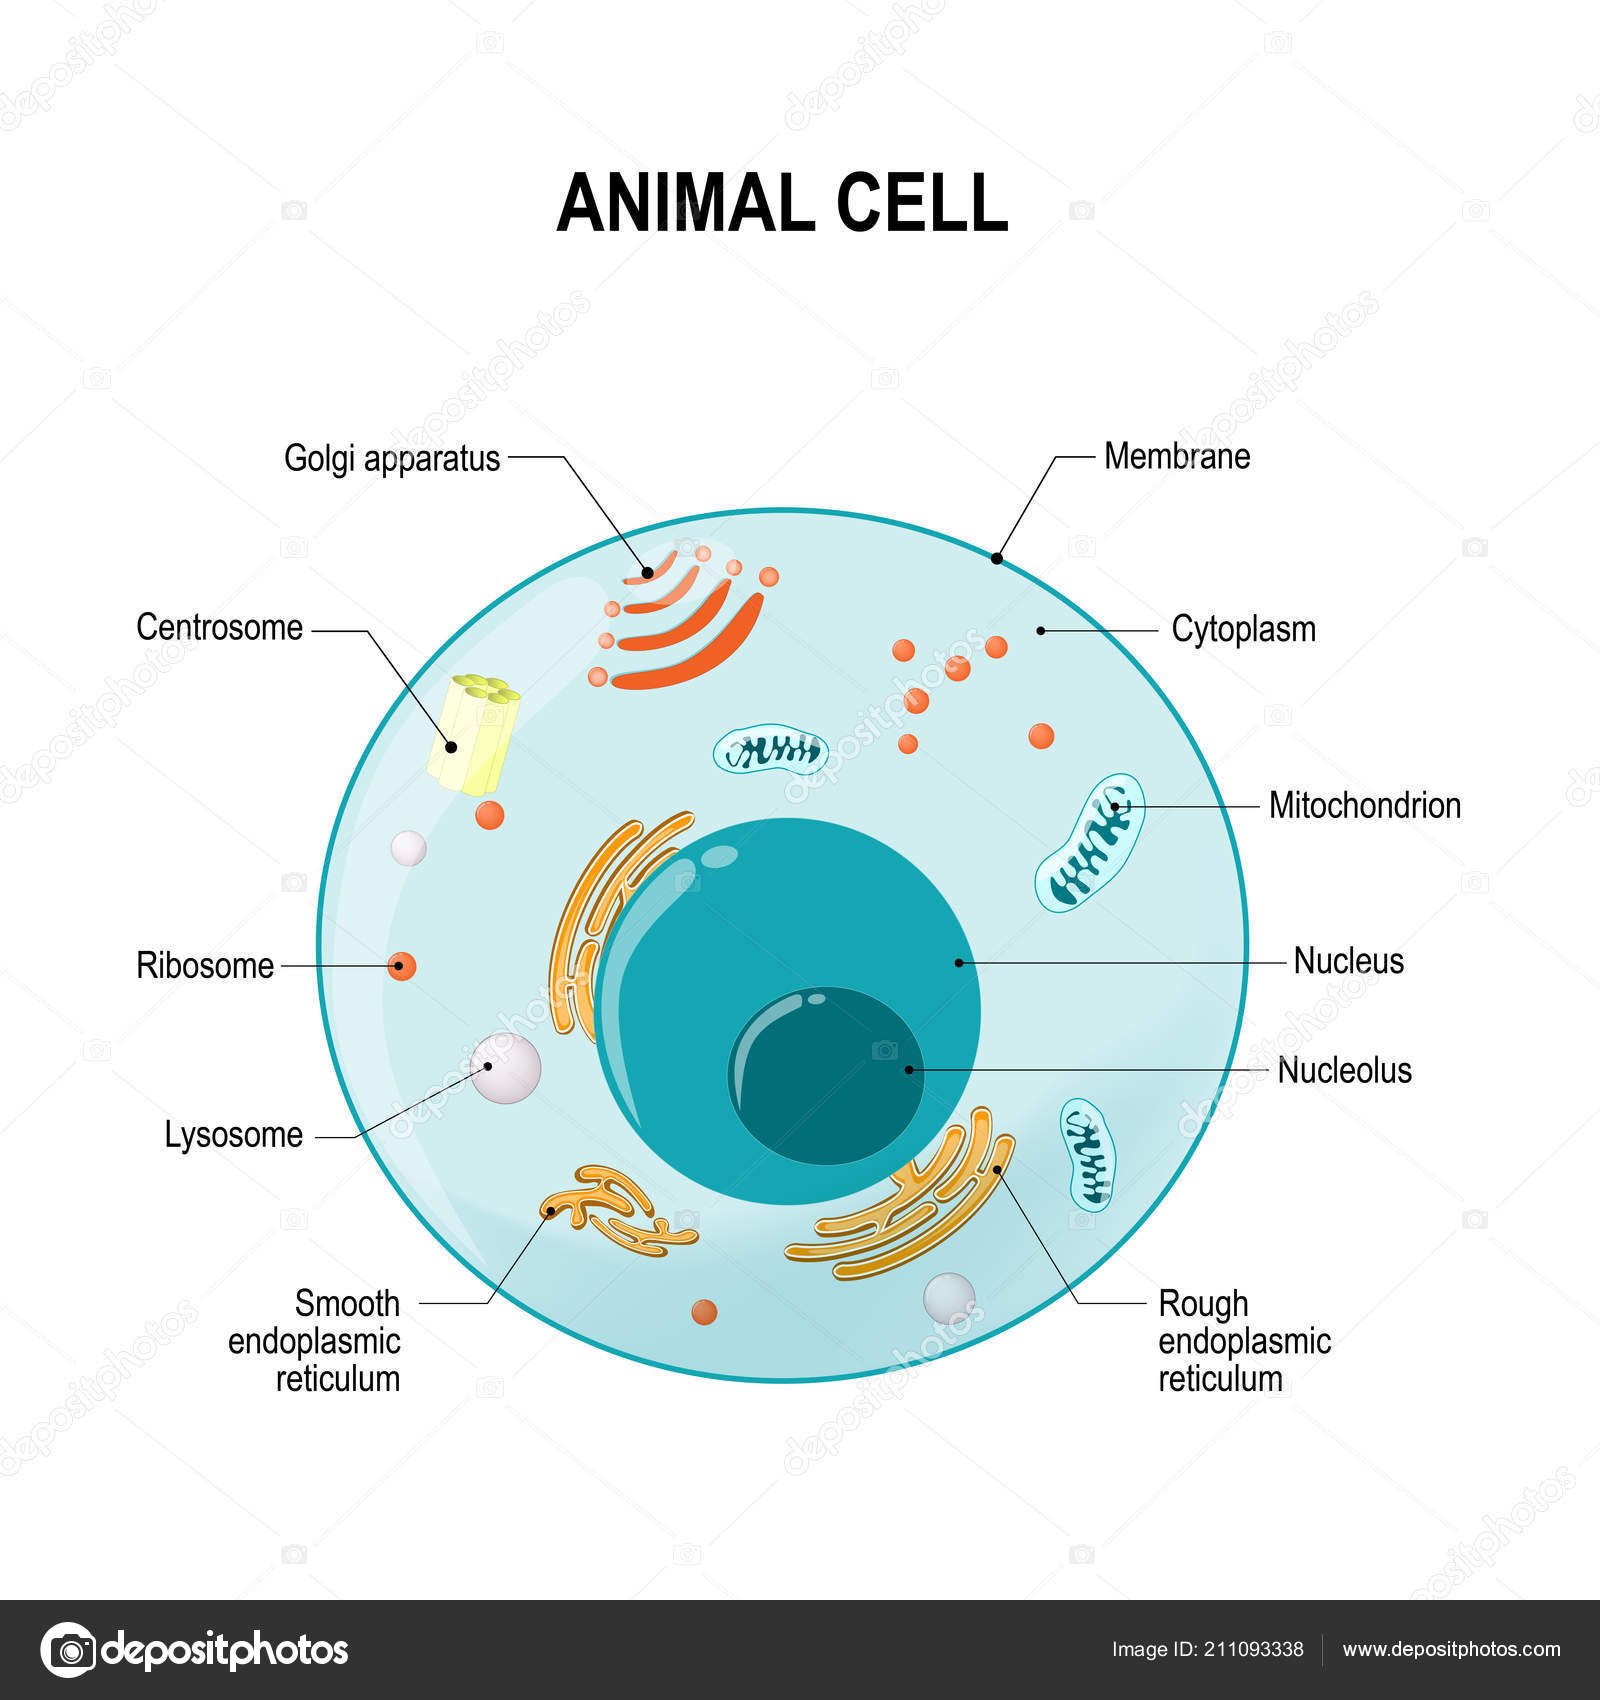 Diagram Of An Animal Cell Human Animal Cell Cross Section Structure Eukaryotic Cell Vector